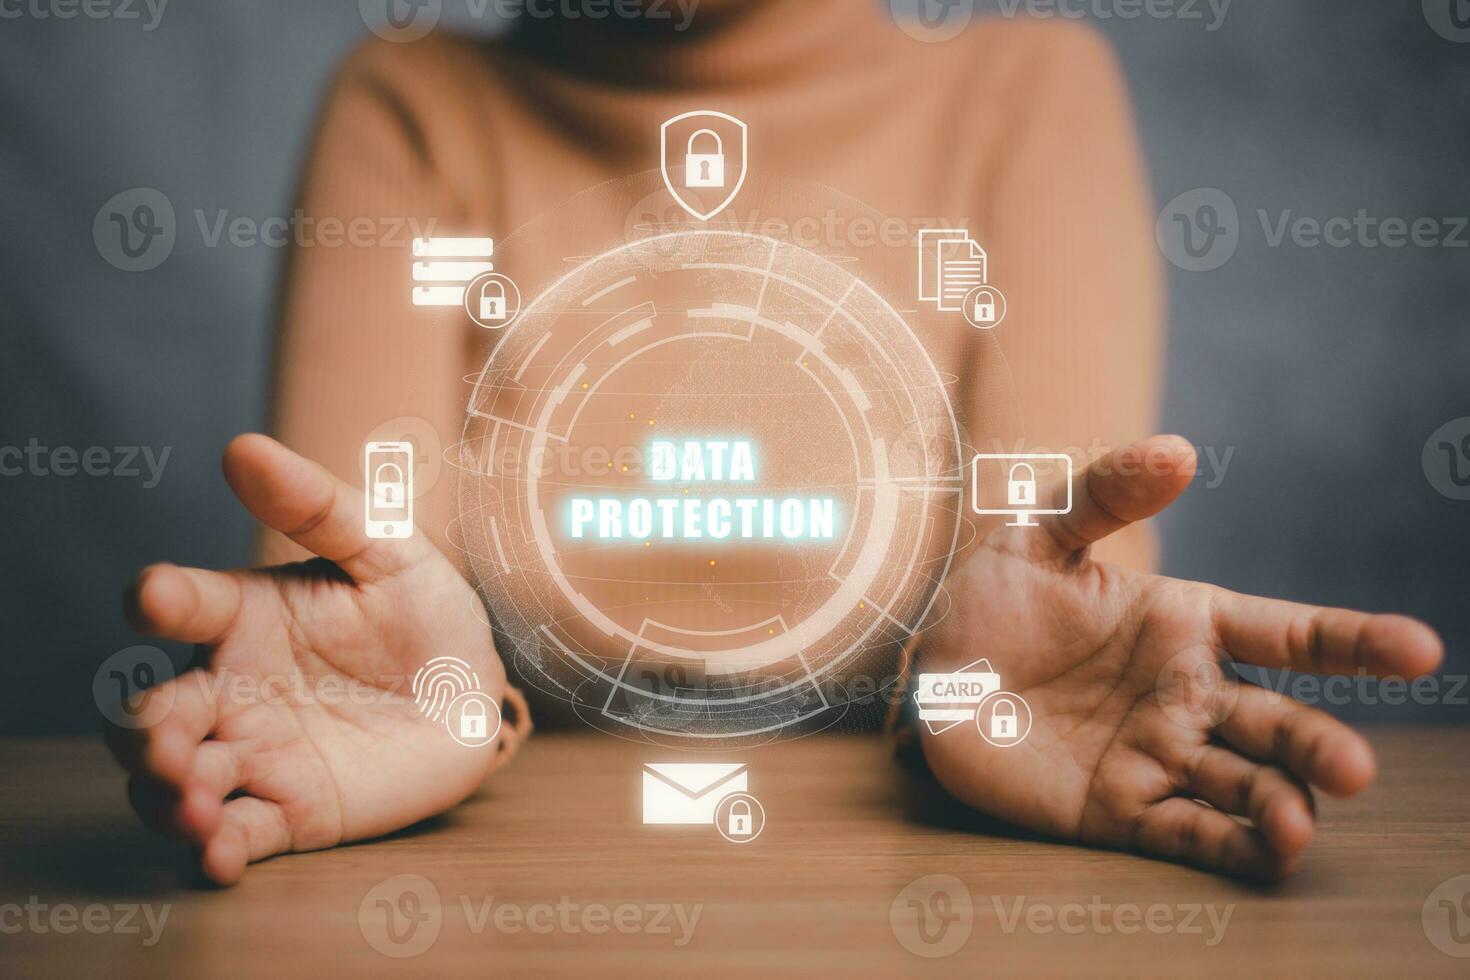 Data protection privacy concept, Business woman protecting data personal information on virtual interface,  GDPR, EU. photo